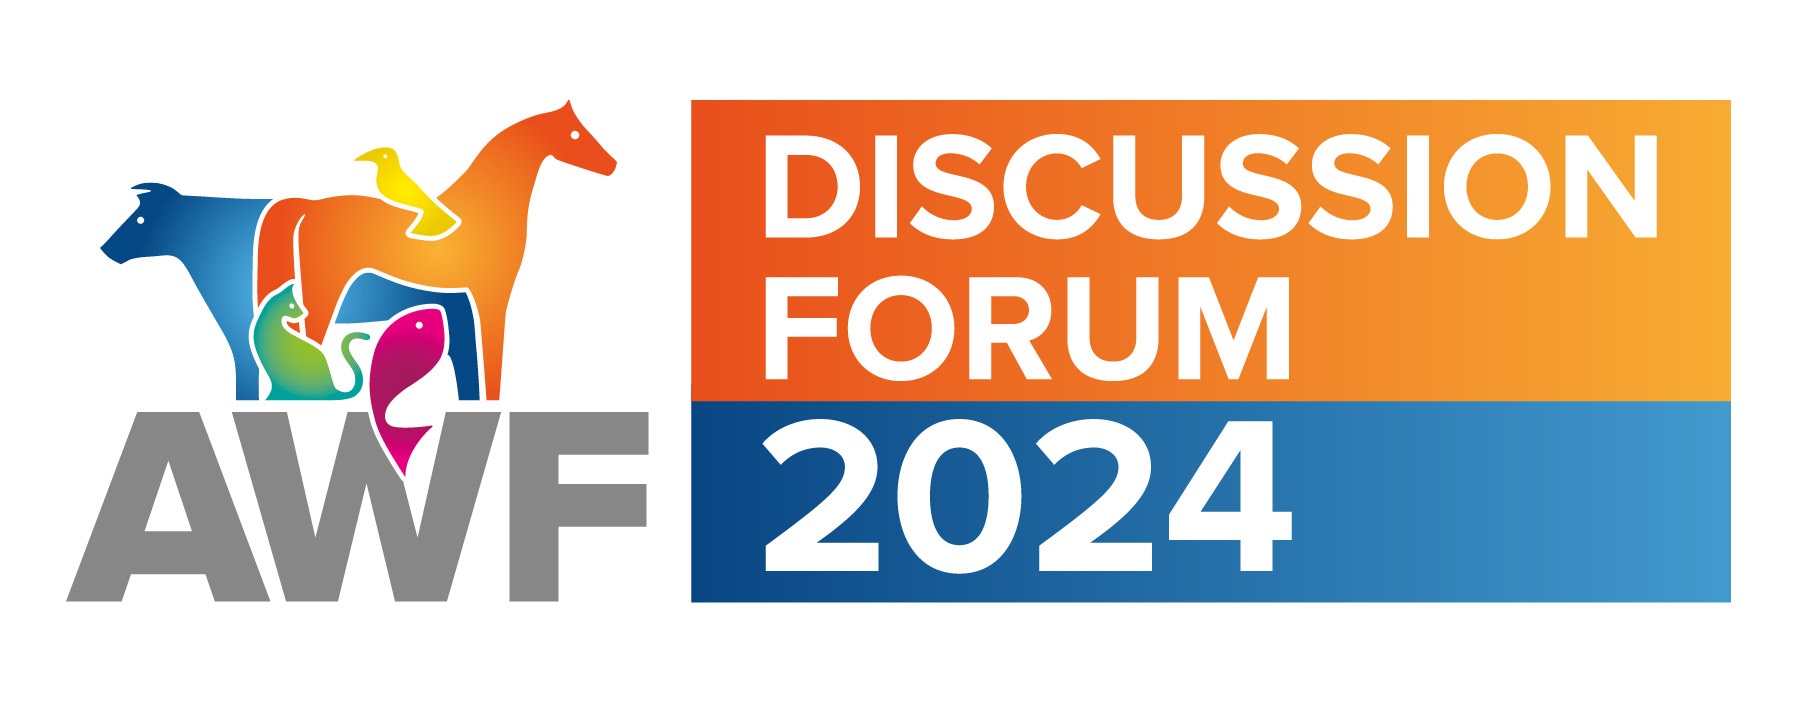 ‘Animal welfare, ethics and rights’ theme of the Animal Welfare Foundation’s 2024 Discussion Forum Listing Image